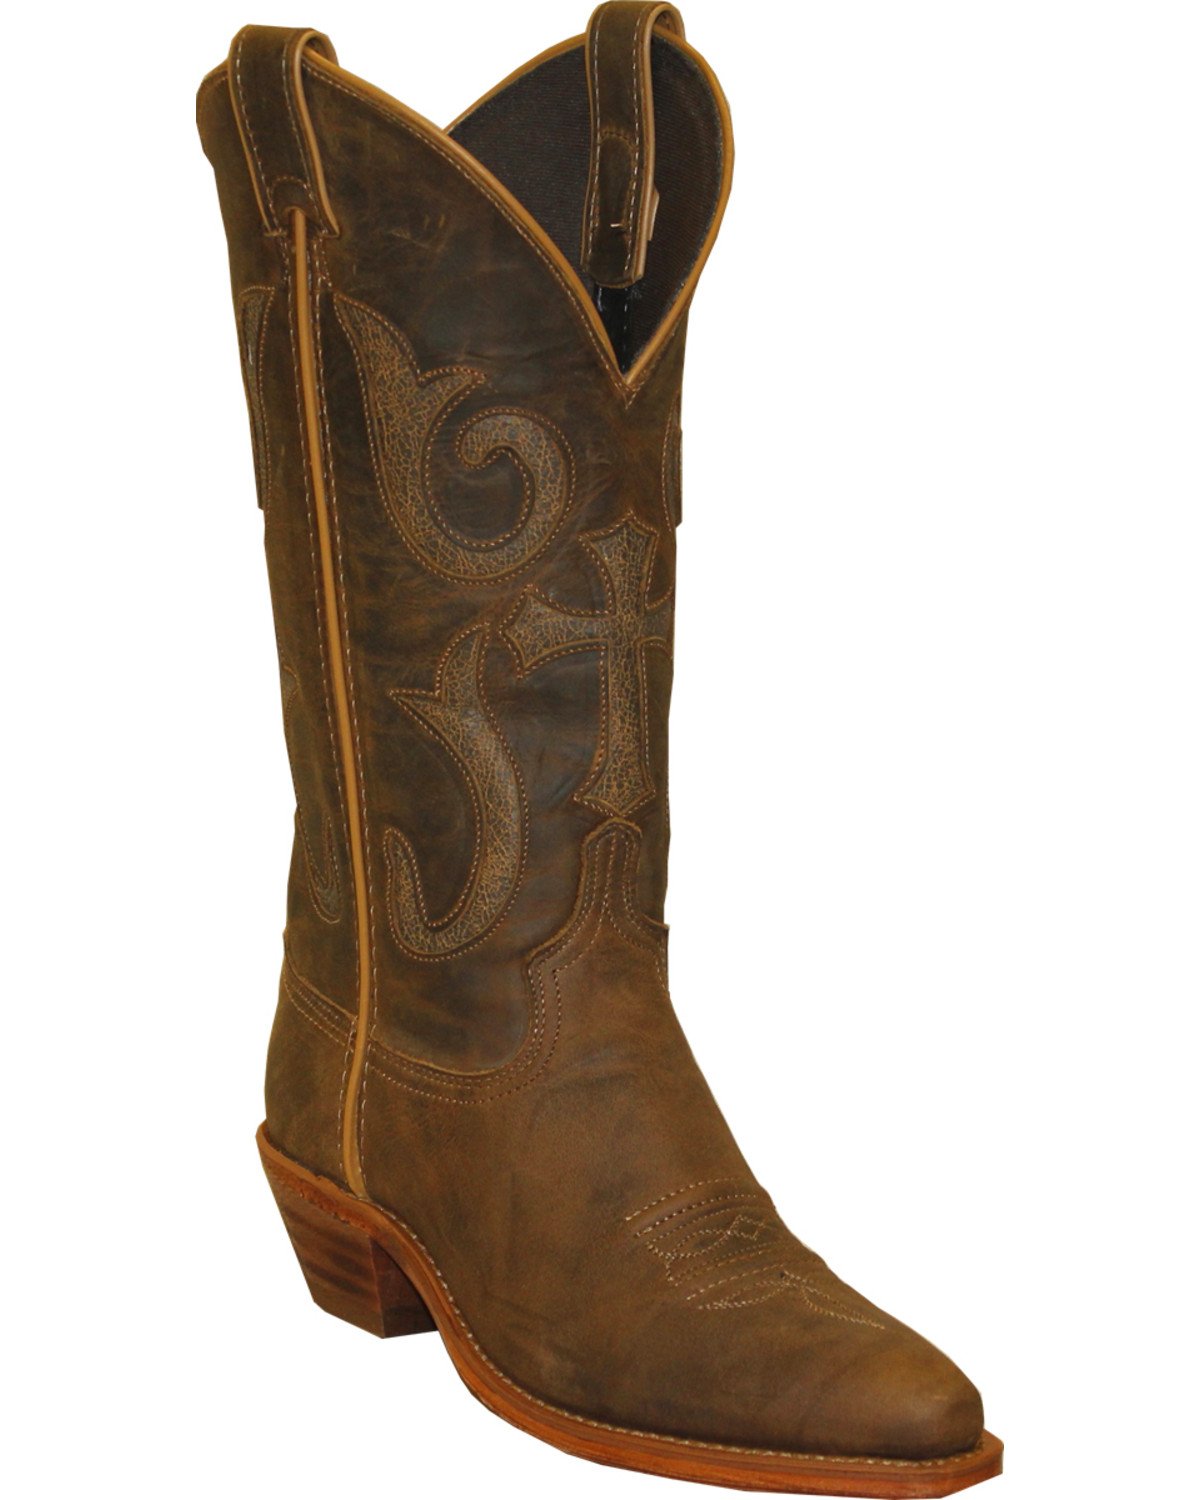 Abilene Women's 12" Distressed Crunched Western Boots